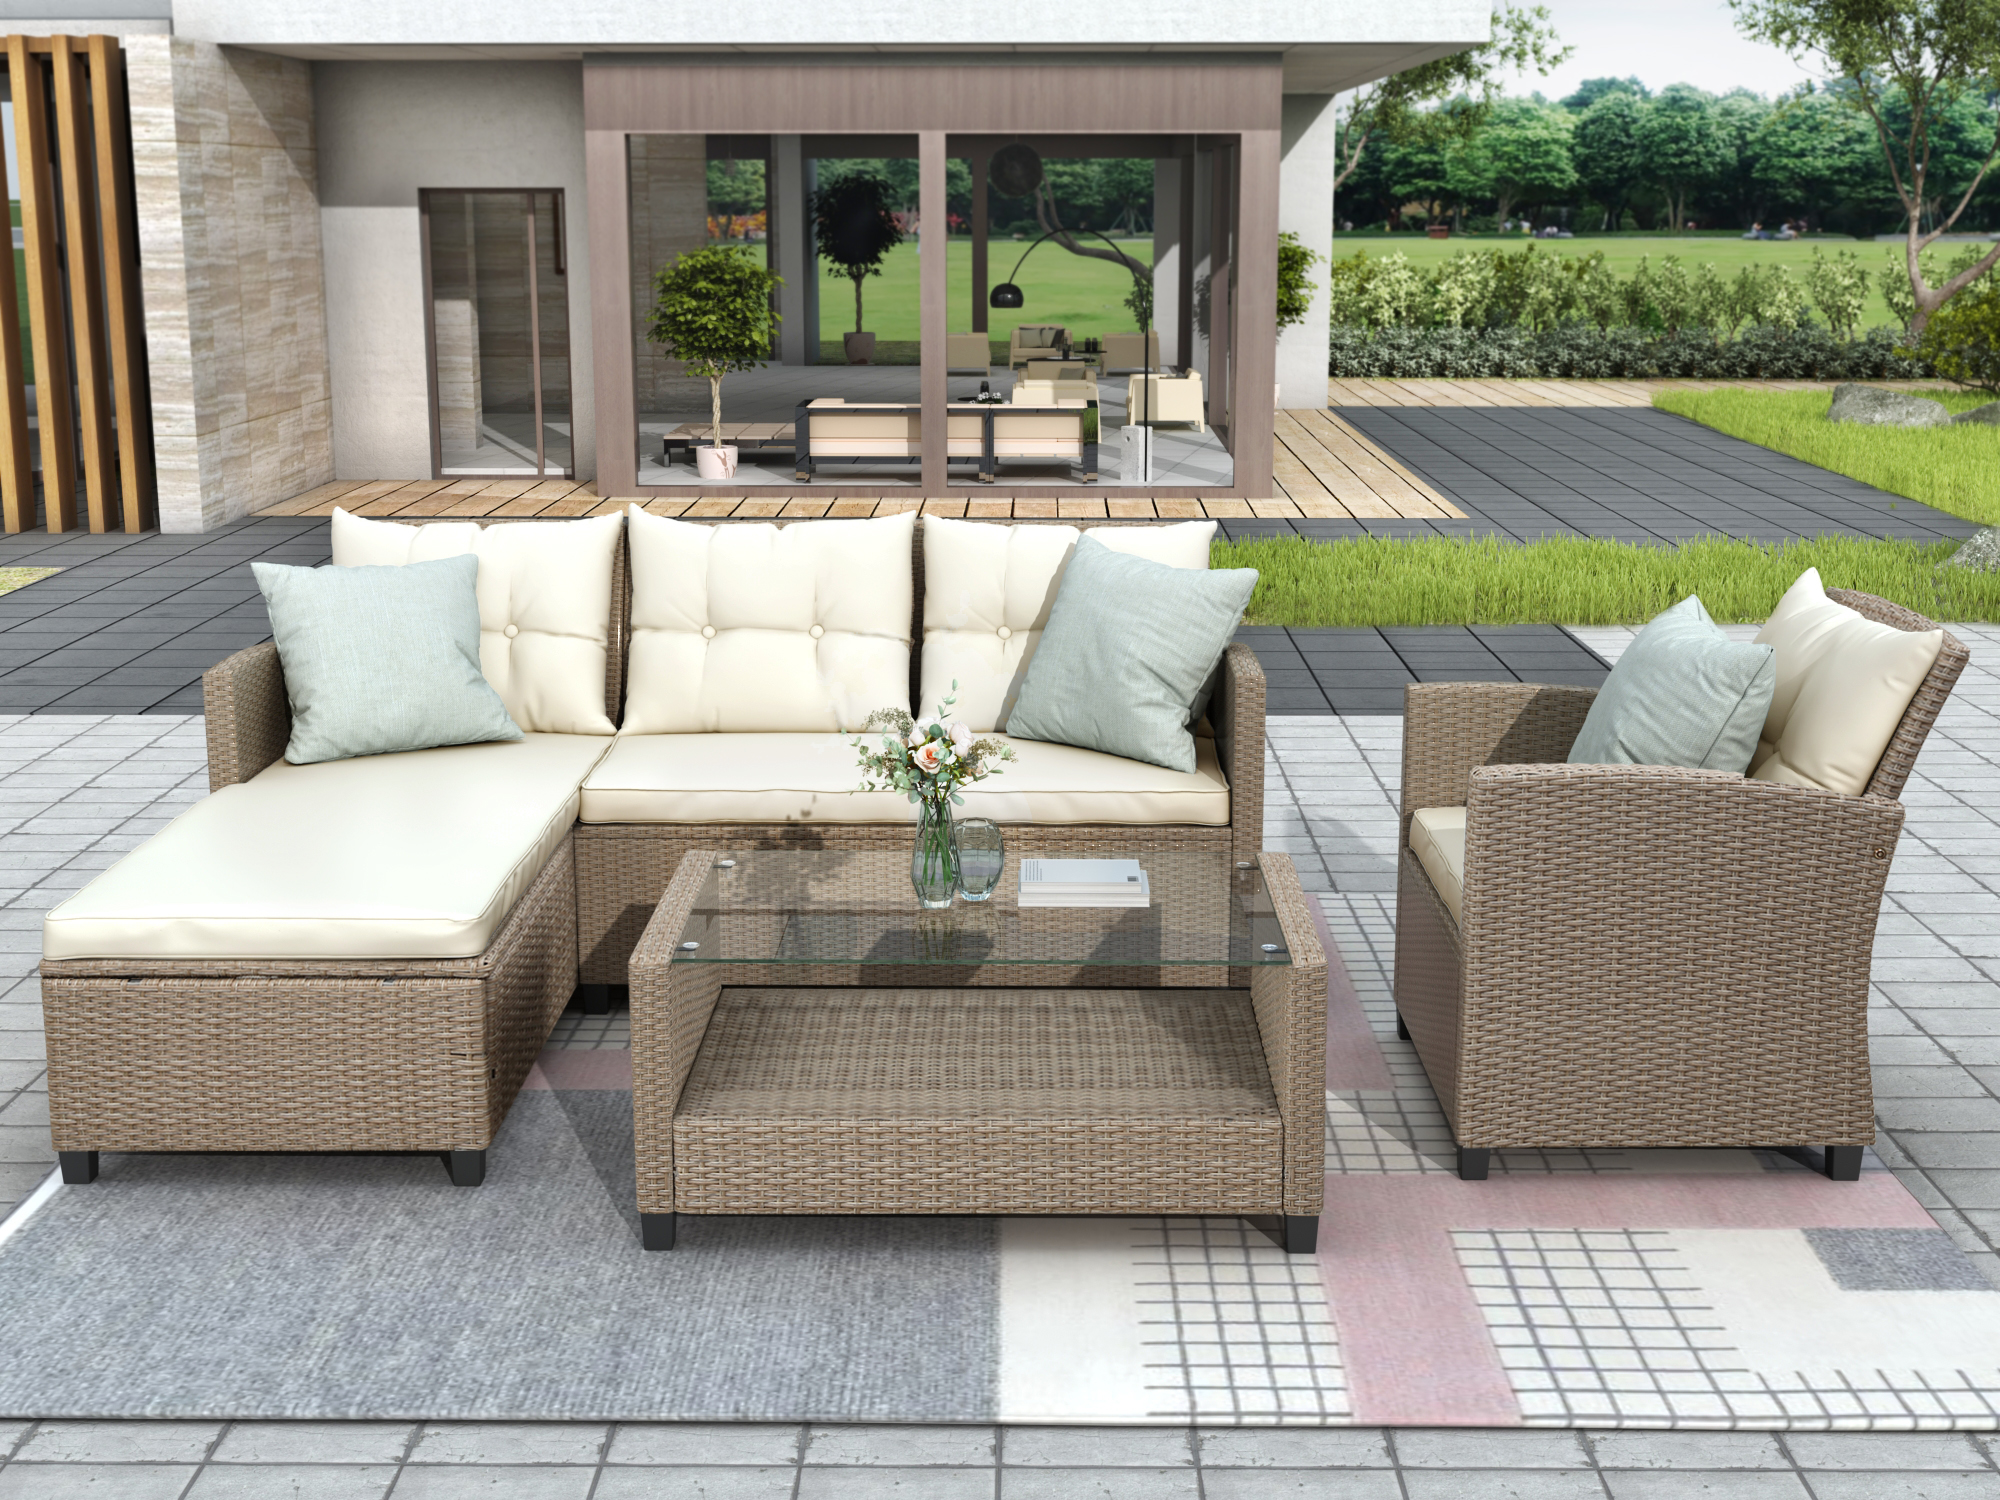 Patio Rattan Sofa Sets, YOFE 4 Piece Outdoor Patio Furniture Set, Wicker Deck Patio Furniture Dining Sets, Patio Sectional Sofa Sets with Beige Cushions, Outdoor Patio Set for Garden, Poolside, R1763 - image 1 of 7